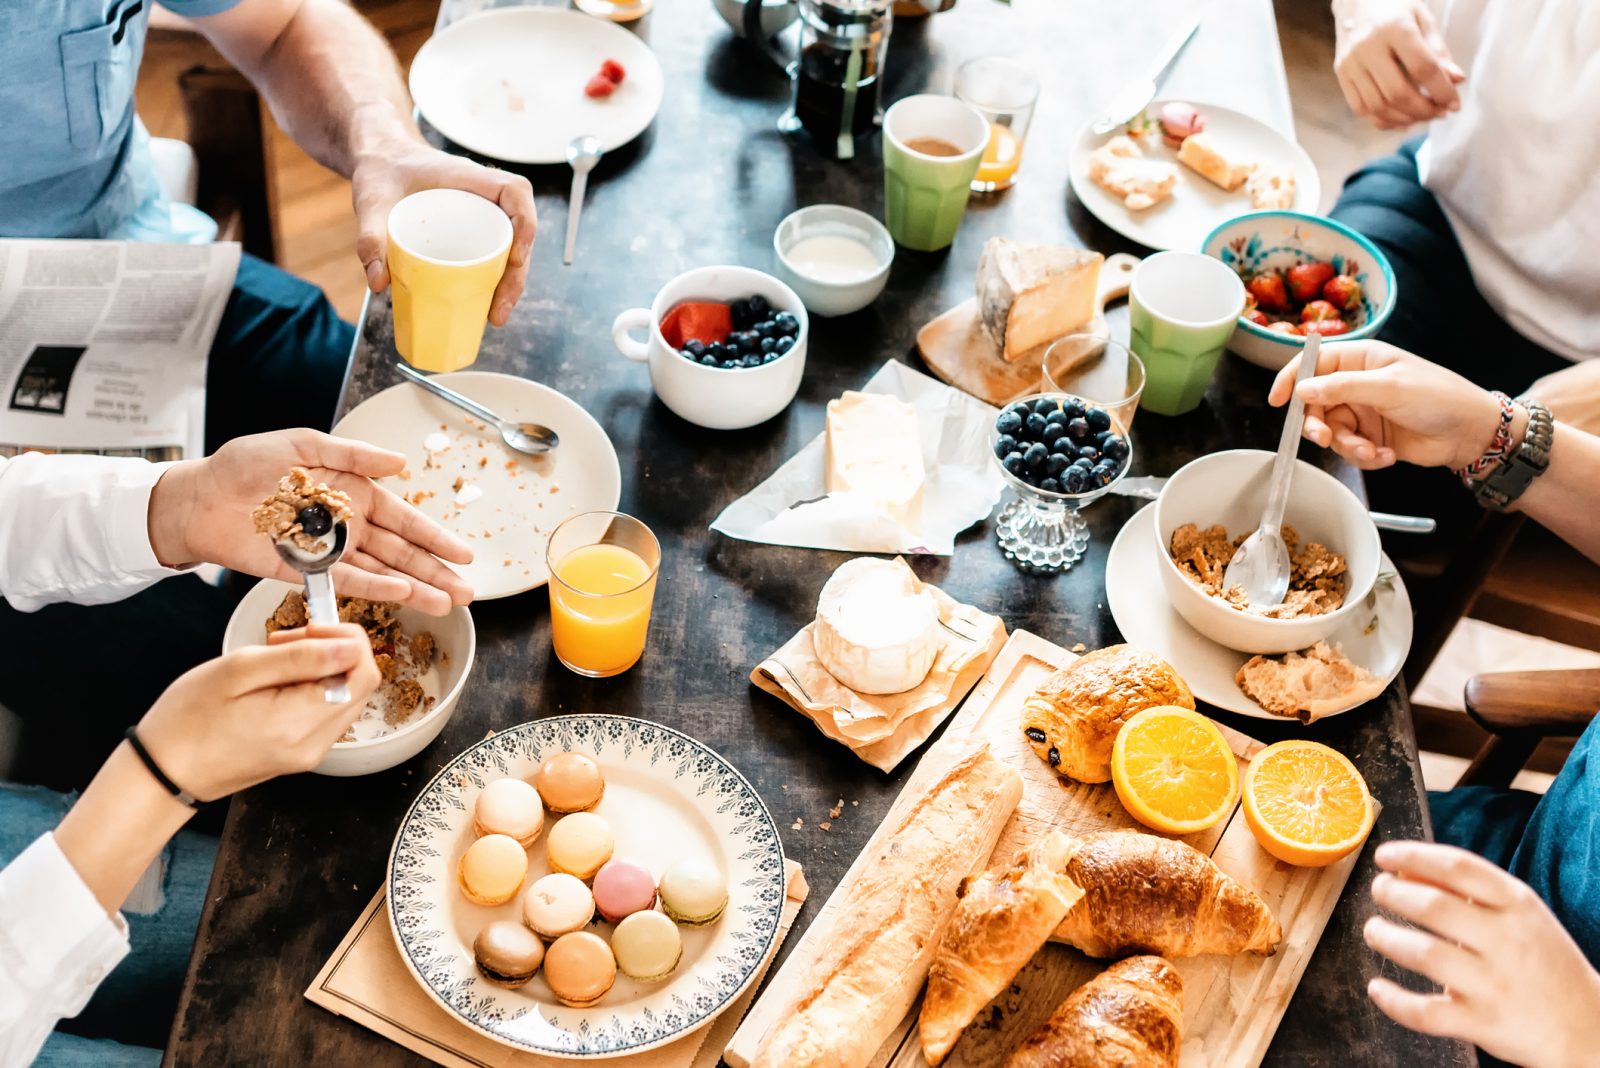 🍳 Make a Big Fancy Breakfast and We’ll Guess If You’re Messy or Clean family having breakfast together at weekend